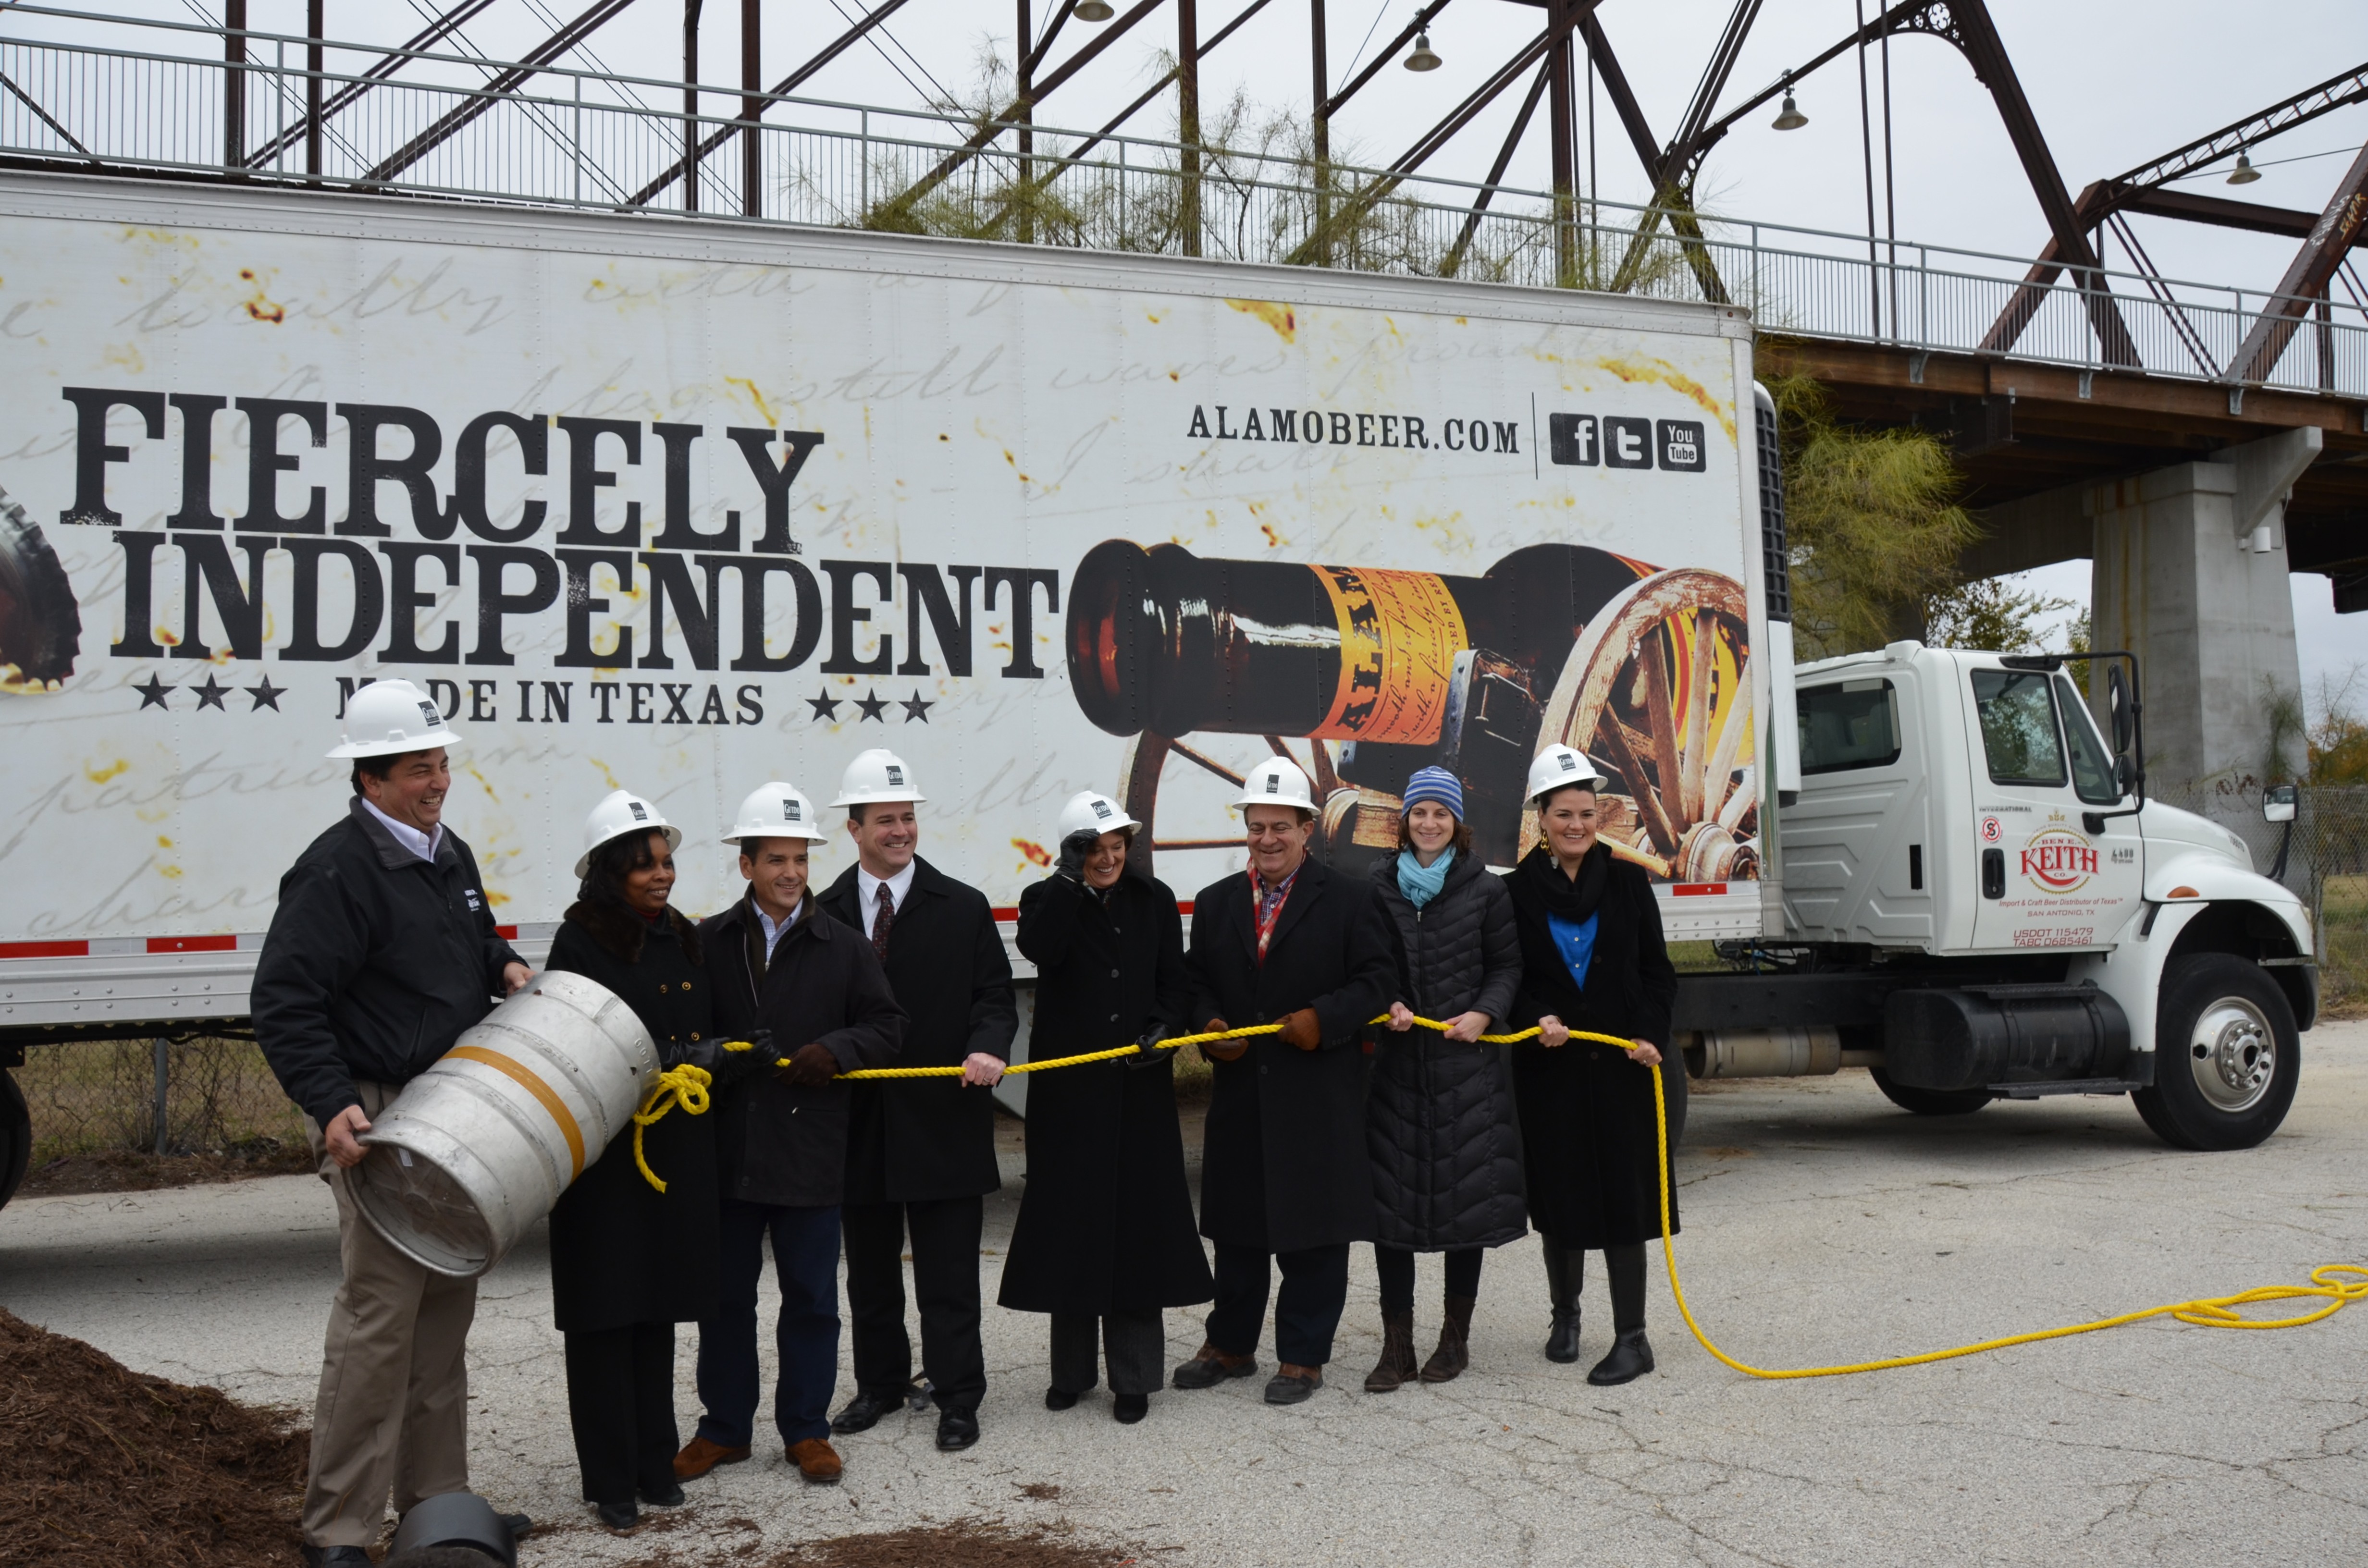 Alamo Beer Holds Chilly Groundbreaking